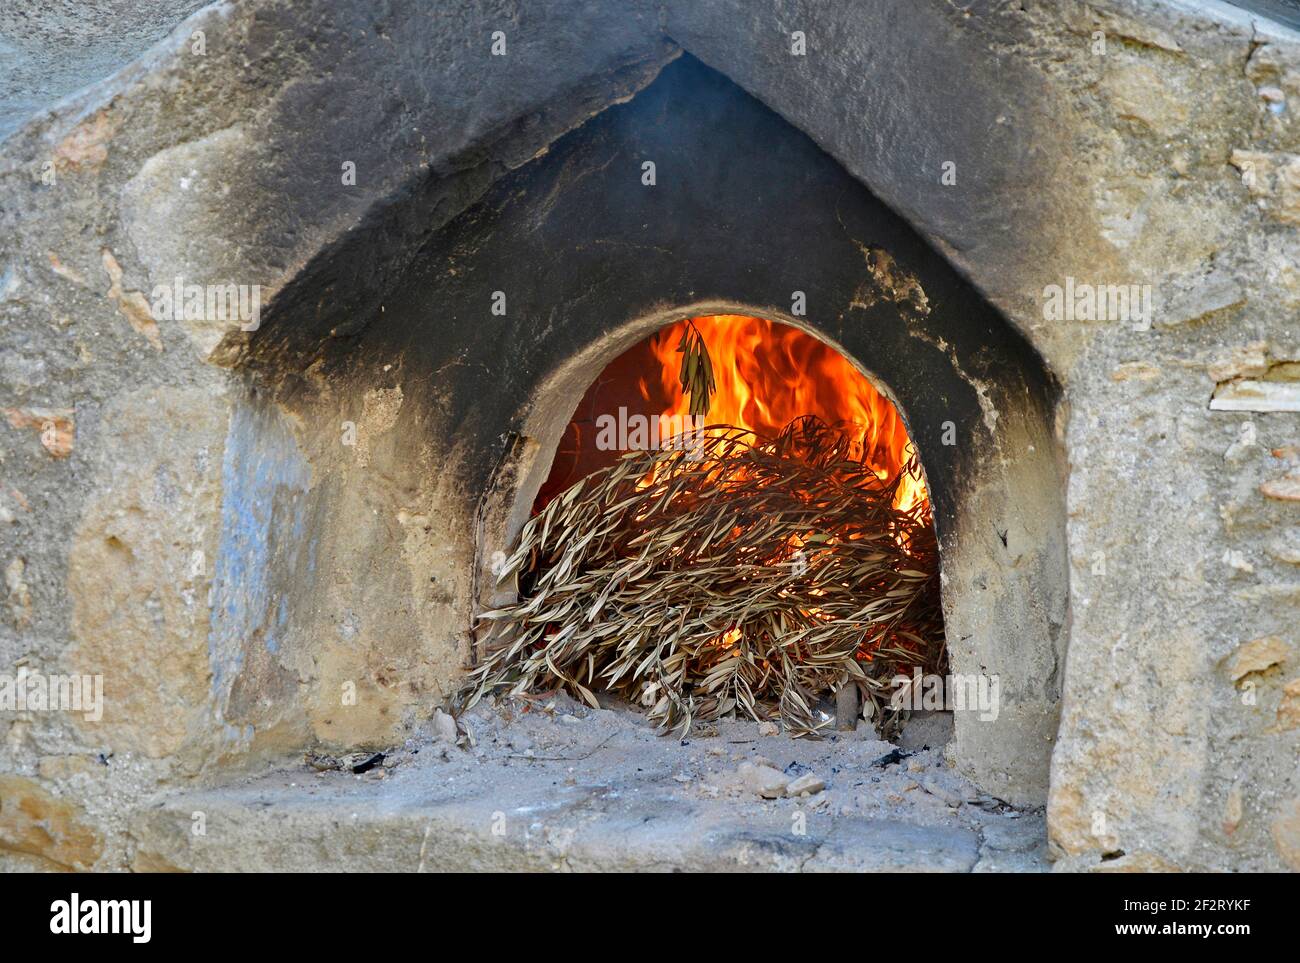 A traditional old Cyptiot stone outdoor wood fired oven with burning olive branches Stock Photo